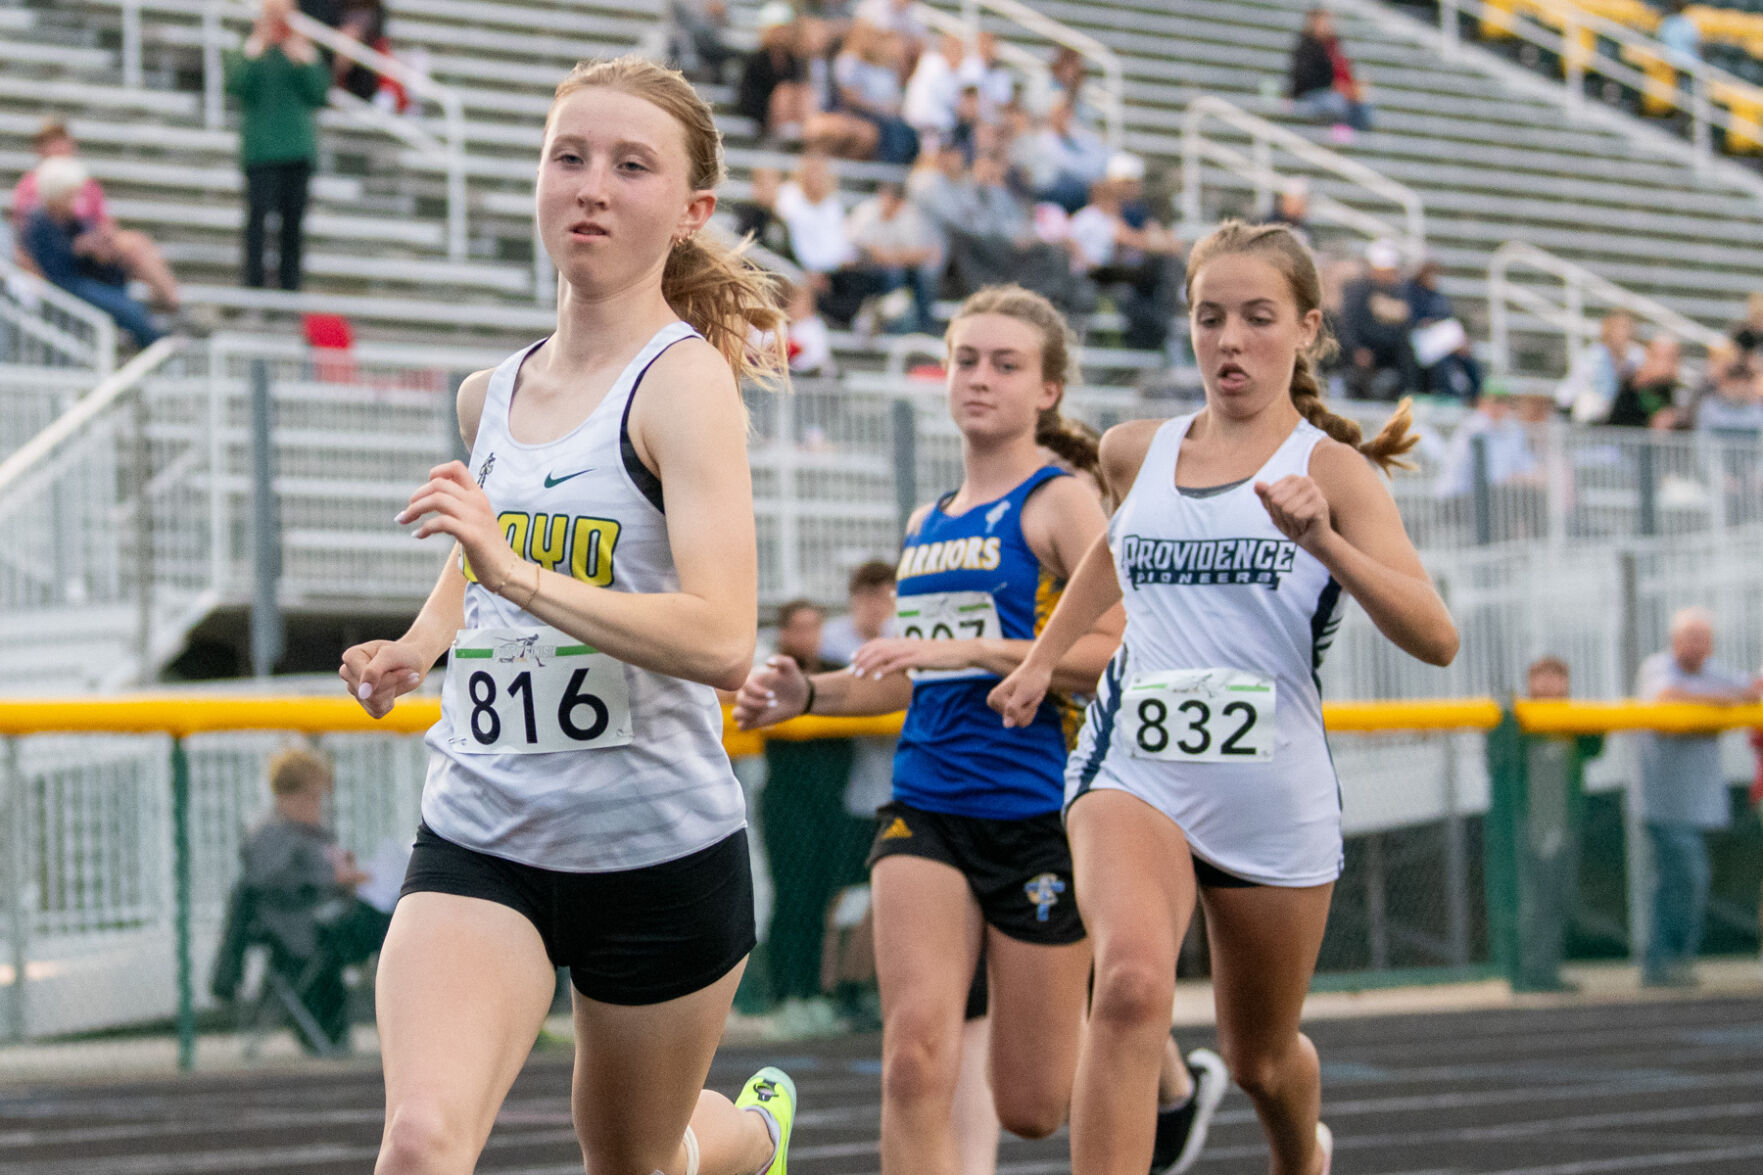 Floyd Central Highlanders Win 4th Consecutive Sectional Title in Girls’ Track & Field